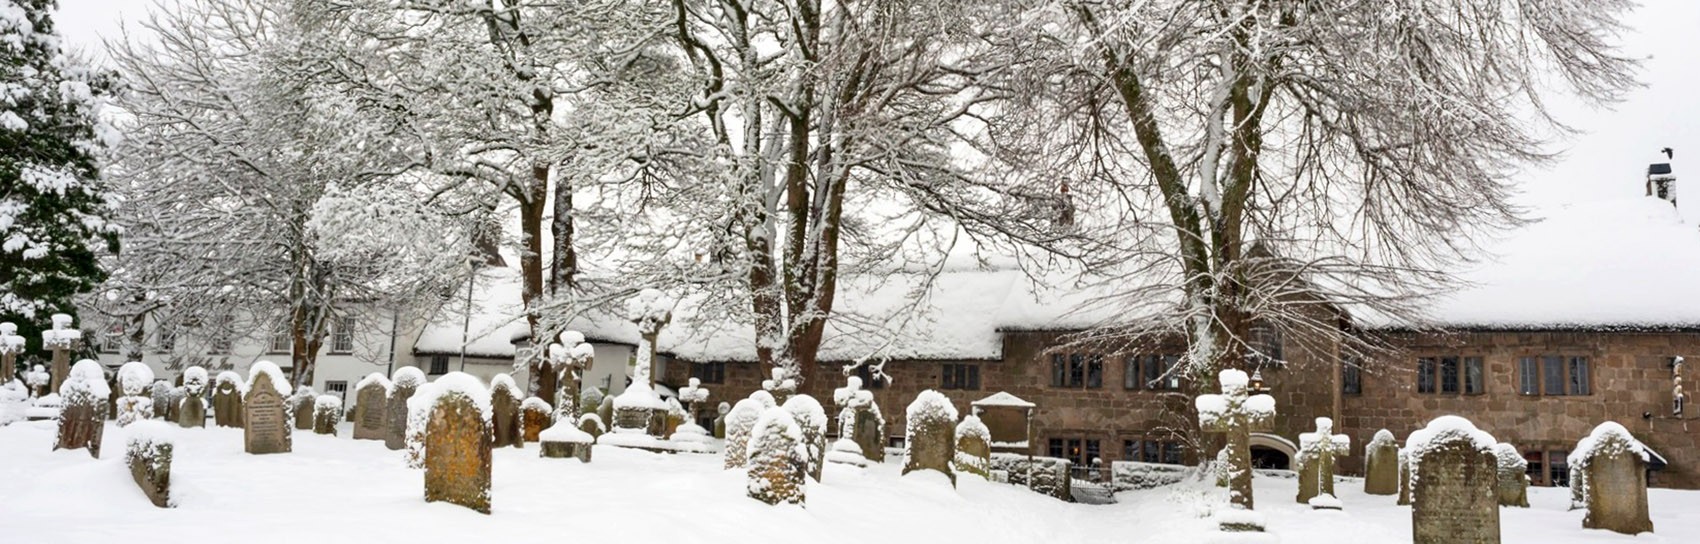 A wintry scene in Chagford in Devon. Photograph by SARAH CLARKE